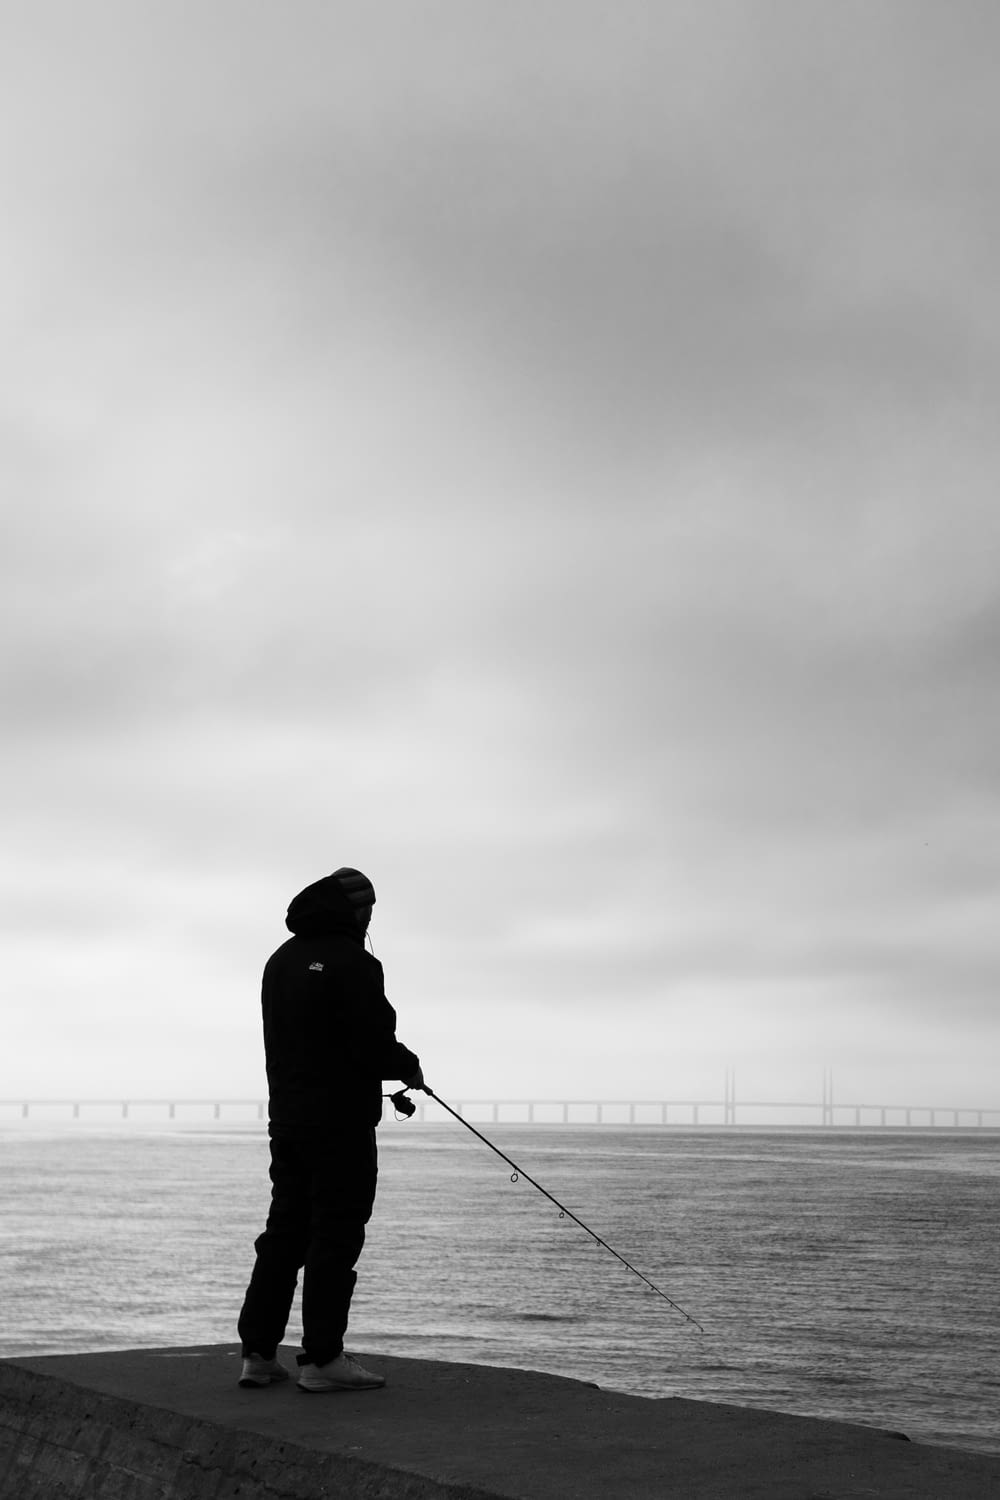 a person fishing on a pier